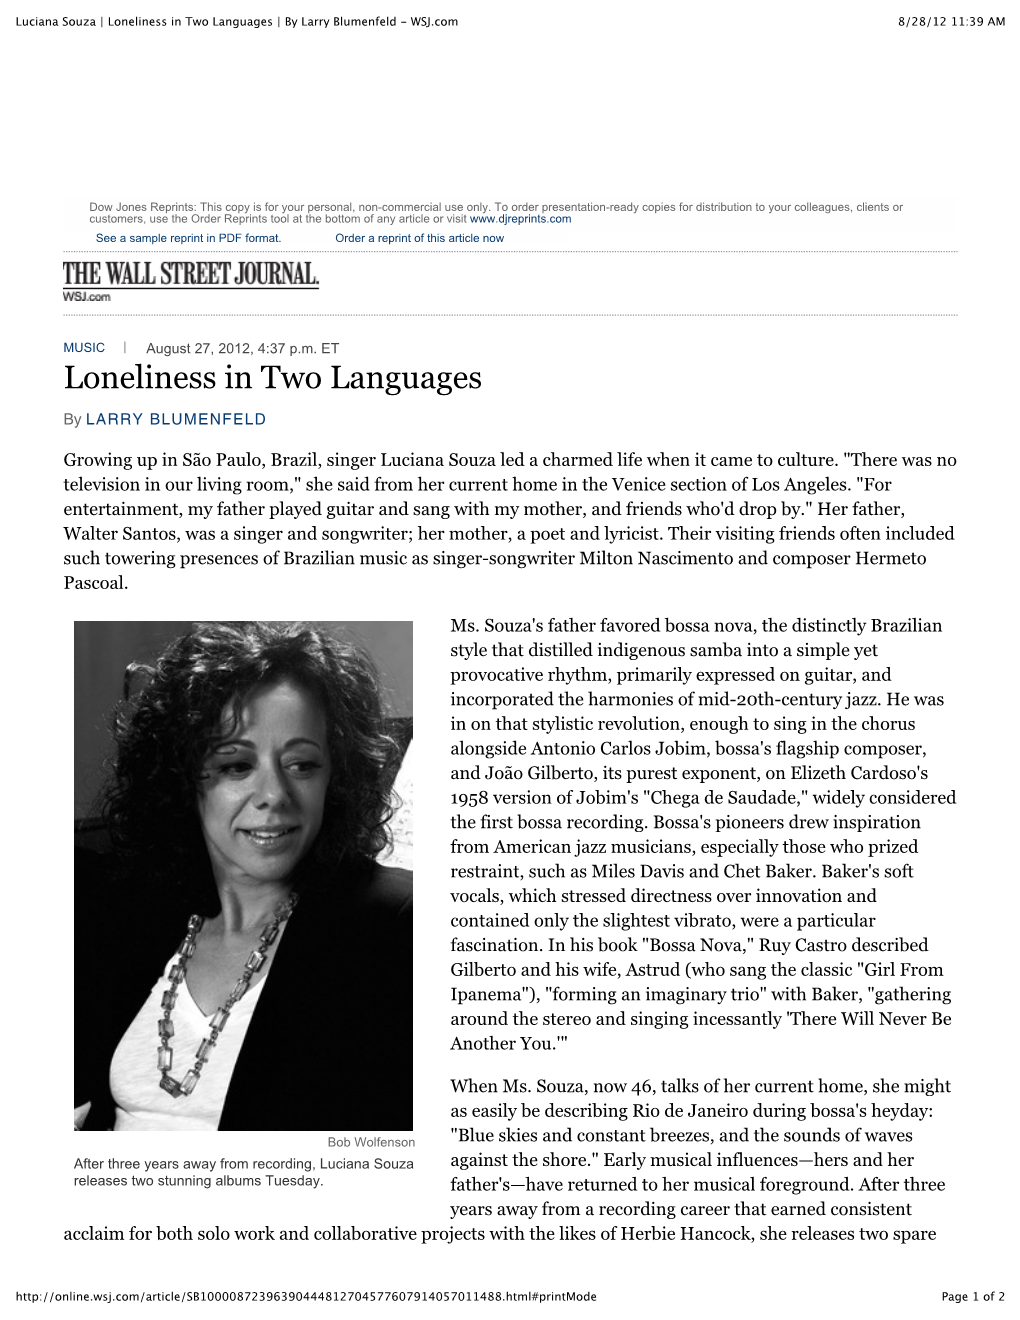 Loneliness in Two Languages | by Larry Blumenfeld - WSJ.Com 8/28/12 11:39 AM